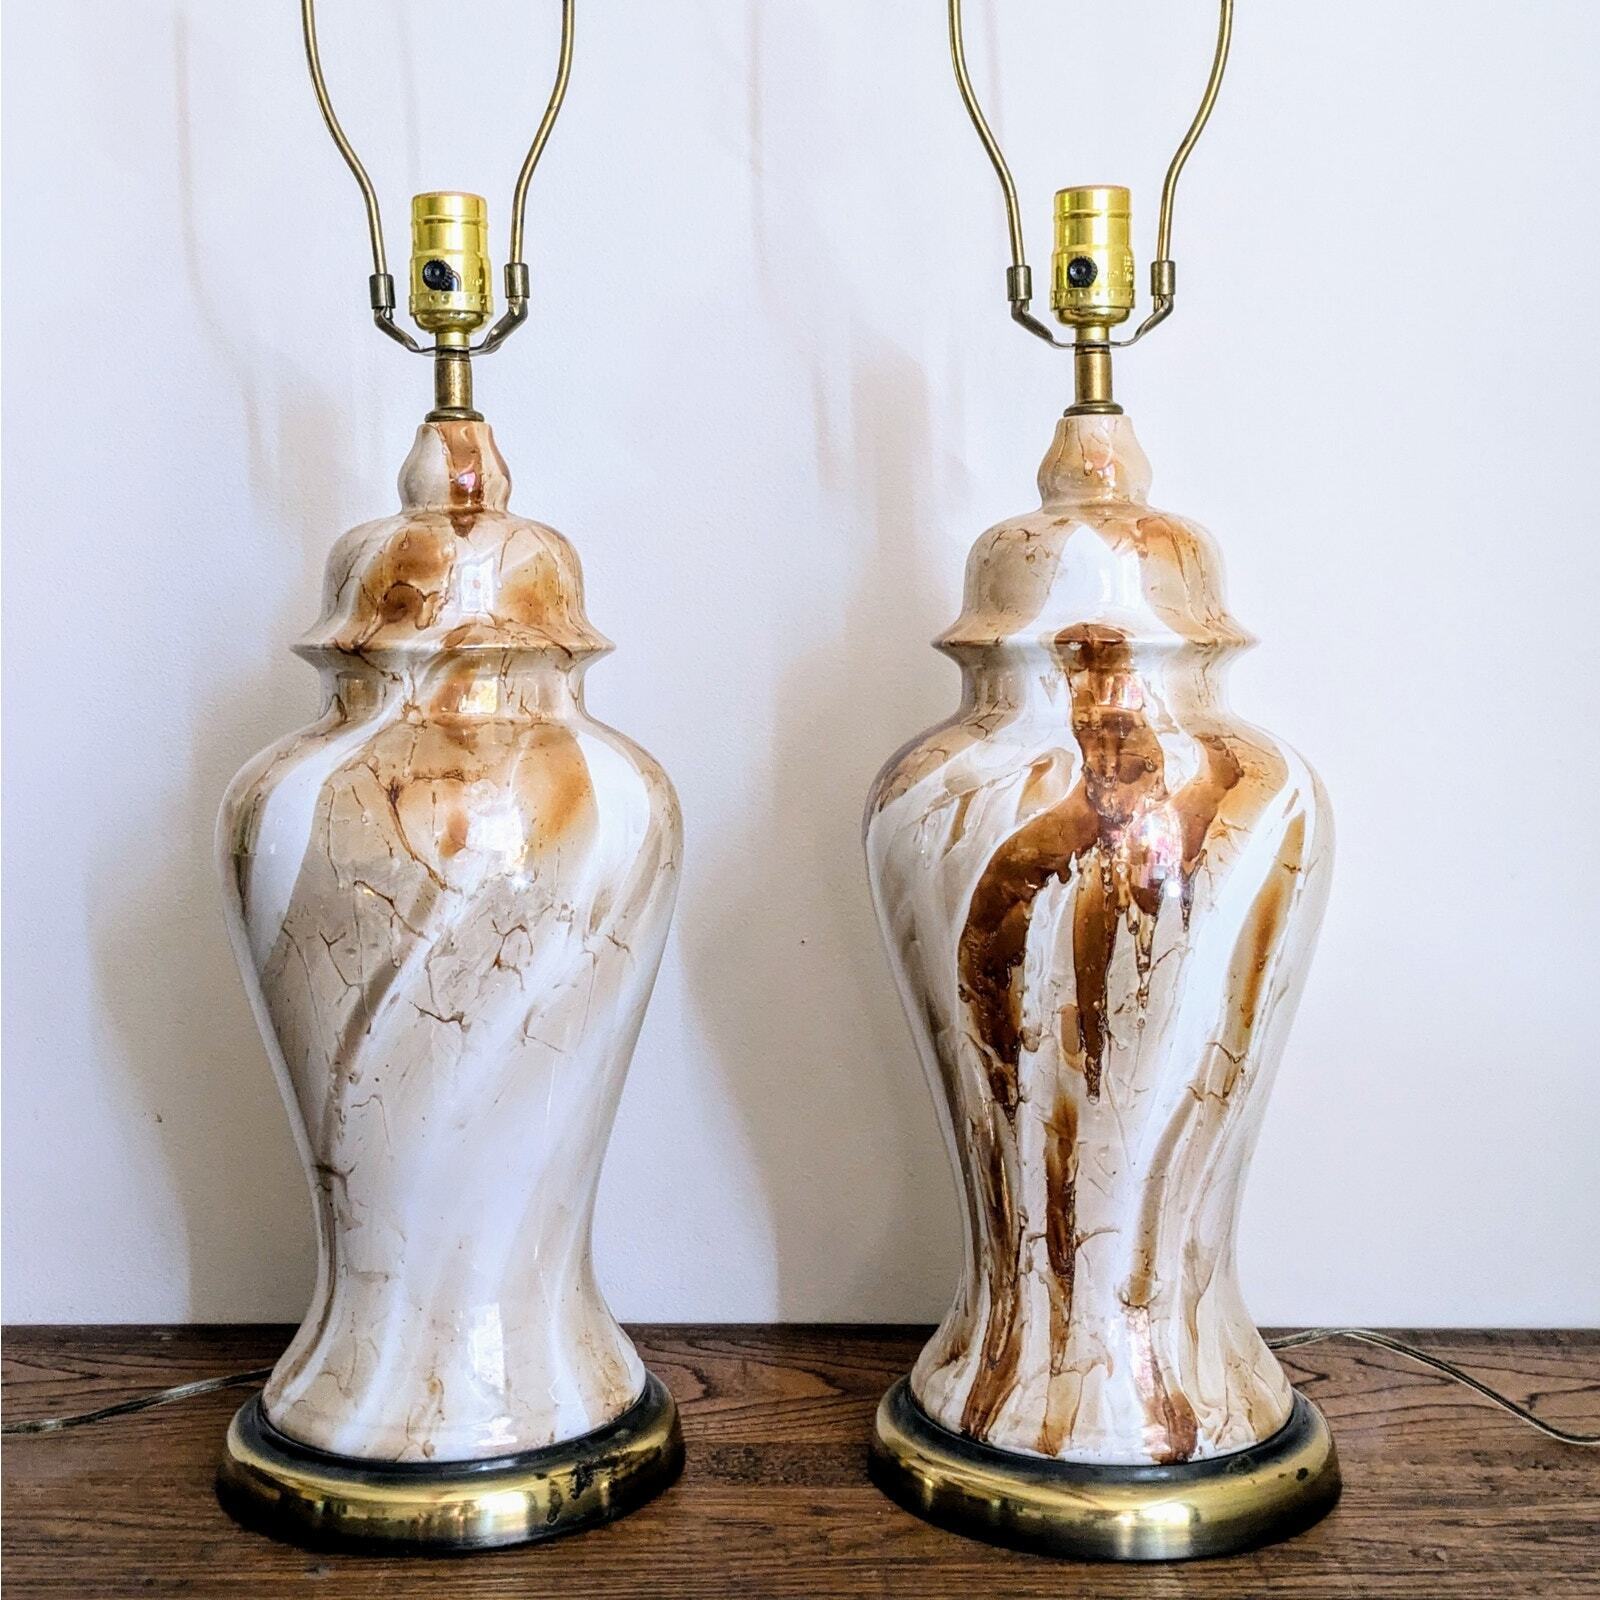 Vintage pair of 1970s 3-way lamps ginger jar style, brown & white marbled glaze